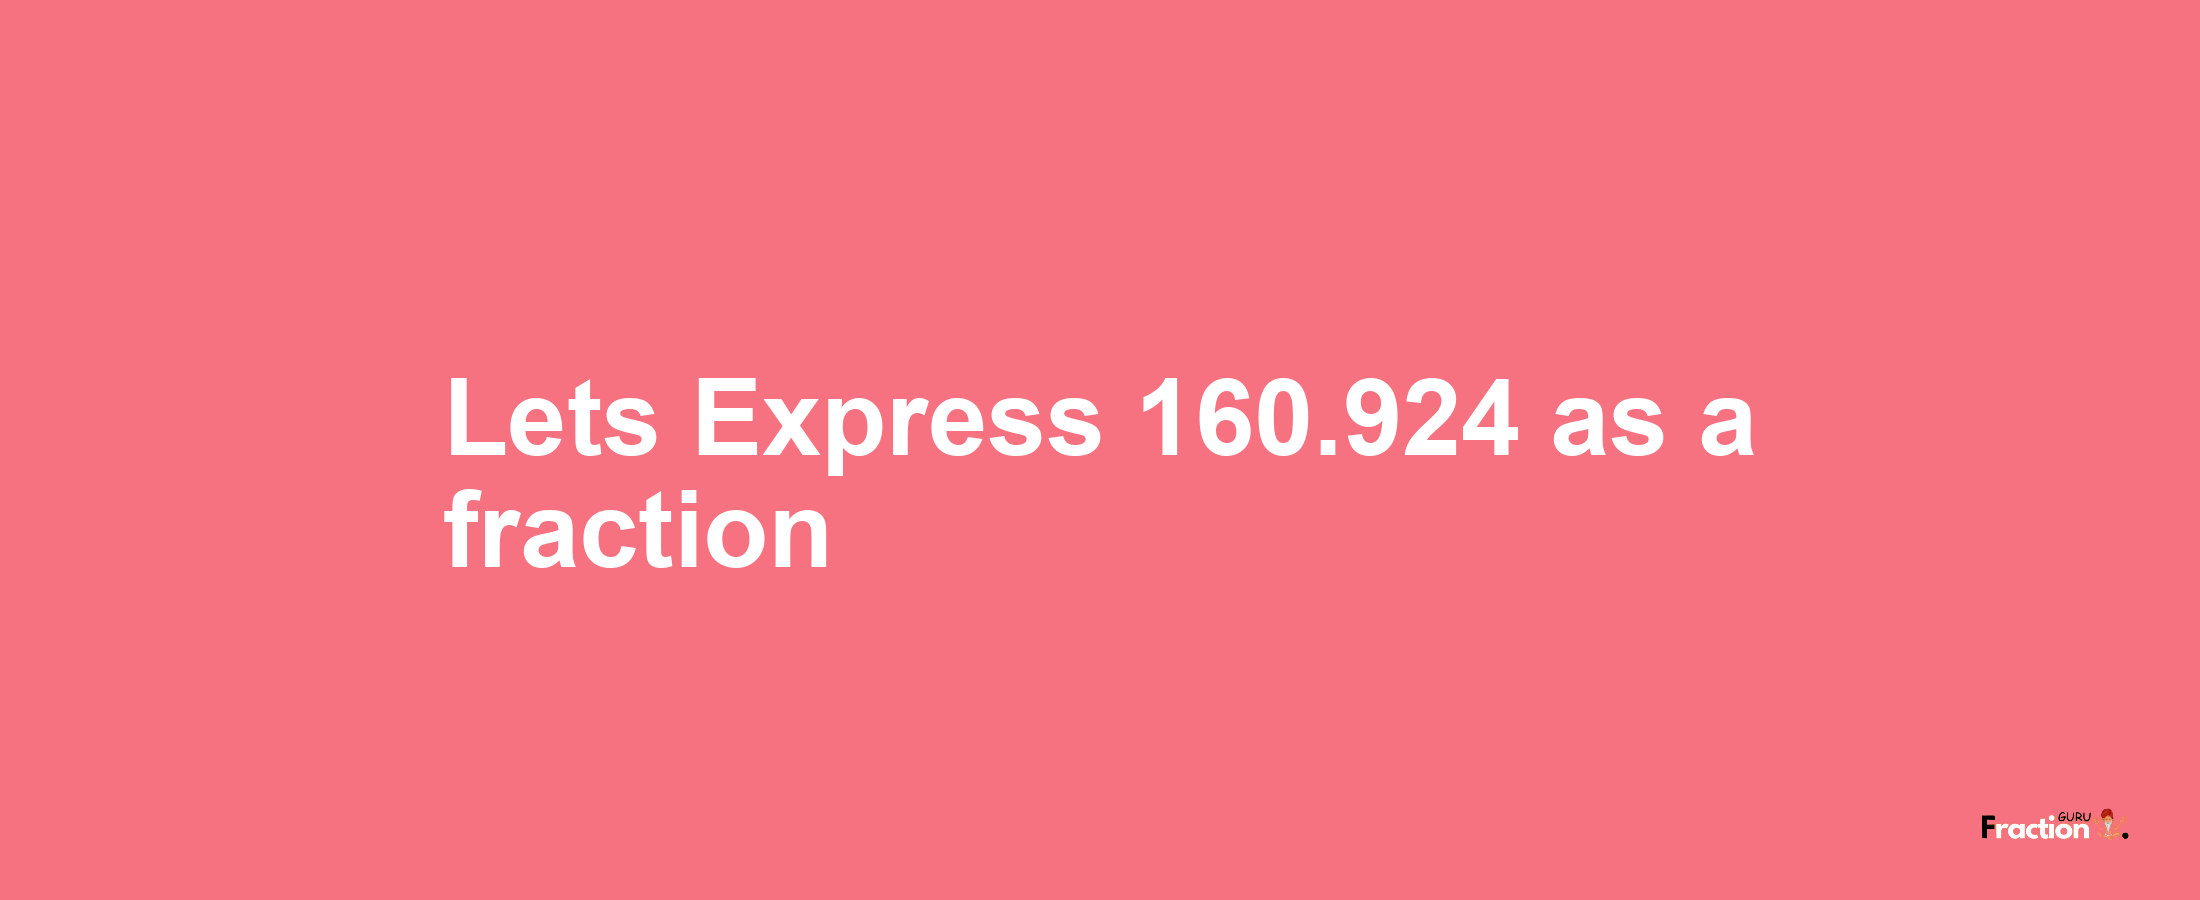 Lets Express 160.924 as afraction